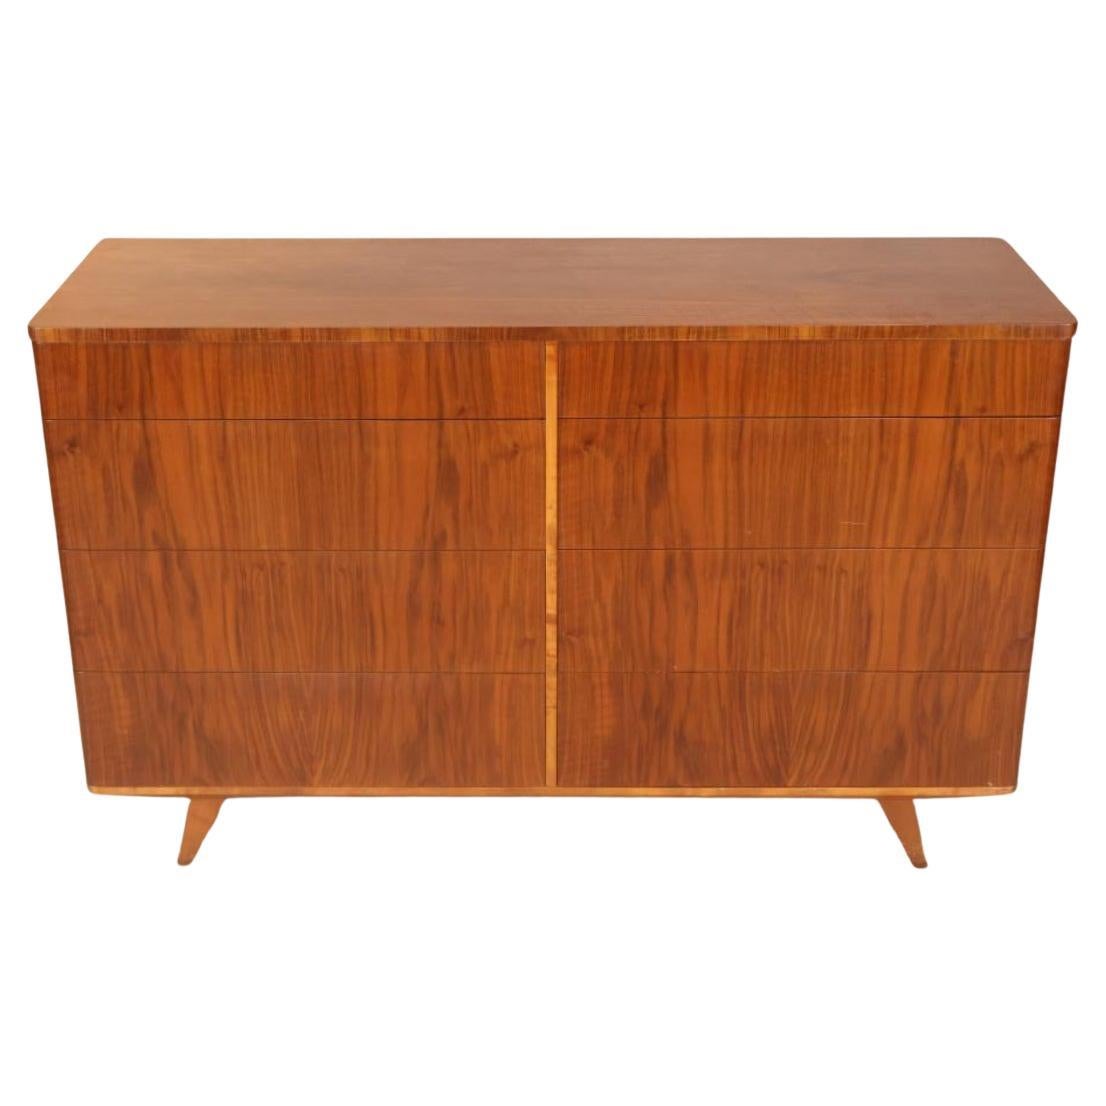 Stunning early deco mid century 8 drawer teak veneer dresser made in Sweden. Beautiful early deco style mid century dresser. Beautiful blonde birch wood drawer construction all clean and slide smooth. Great design with a stunning exotic teak veneer